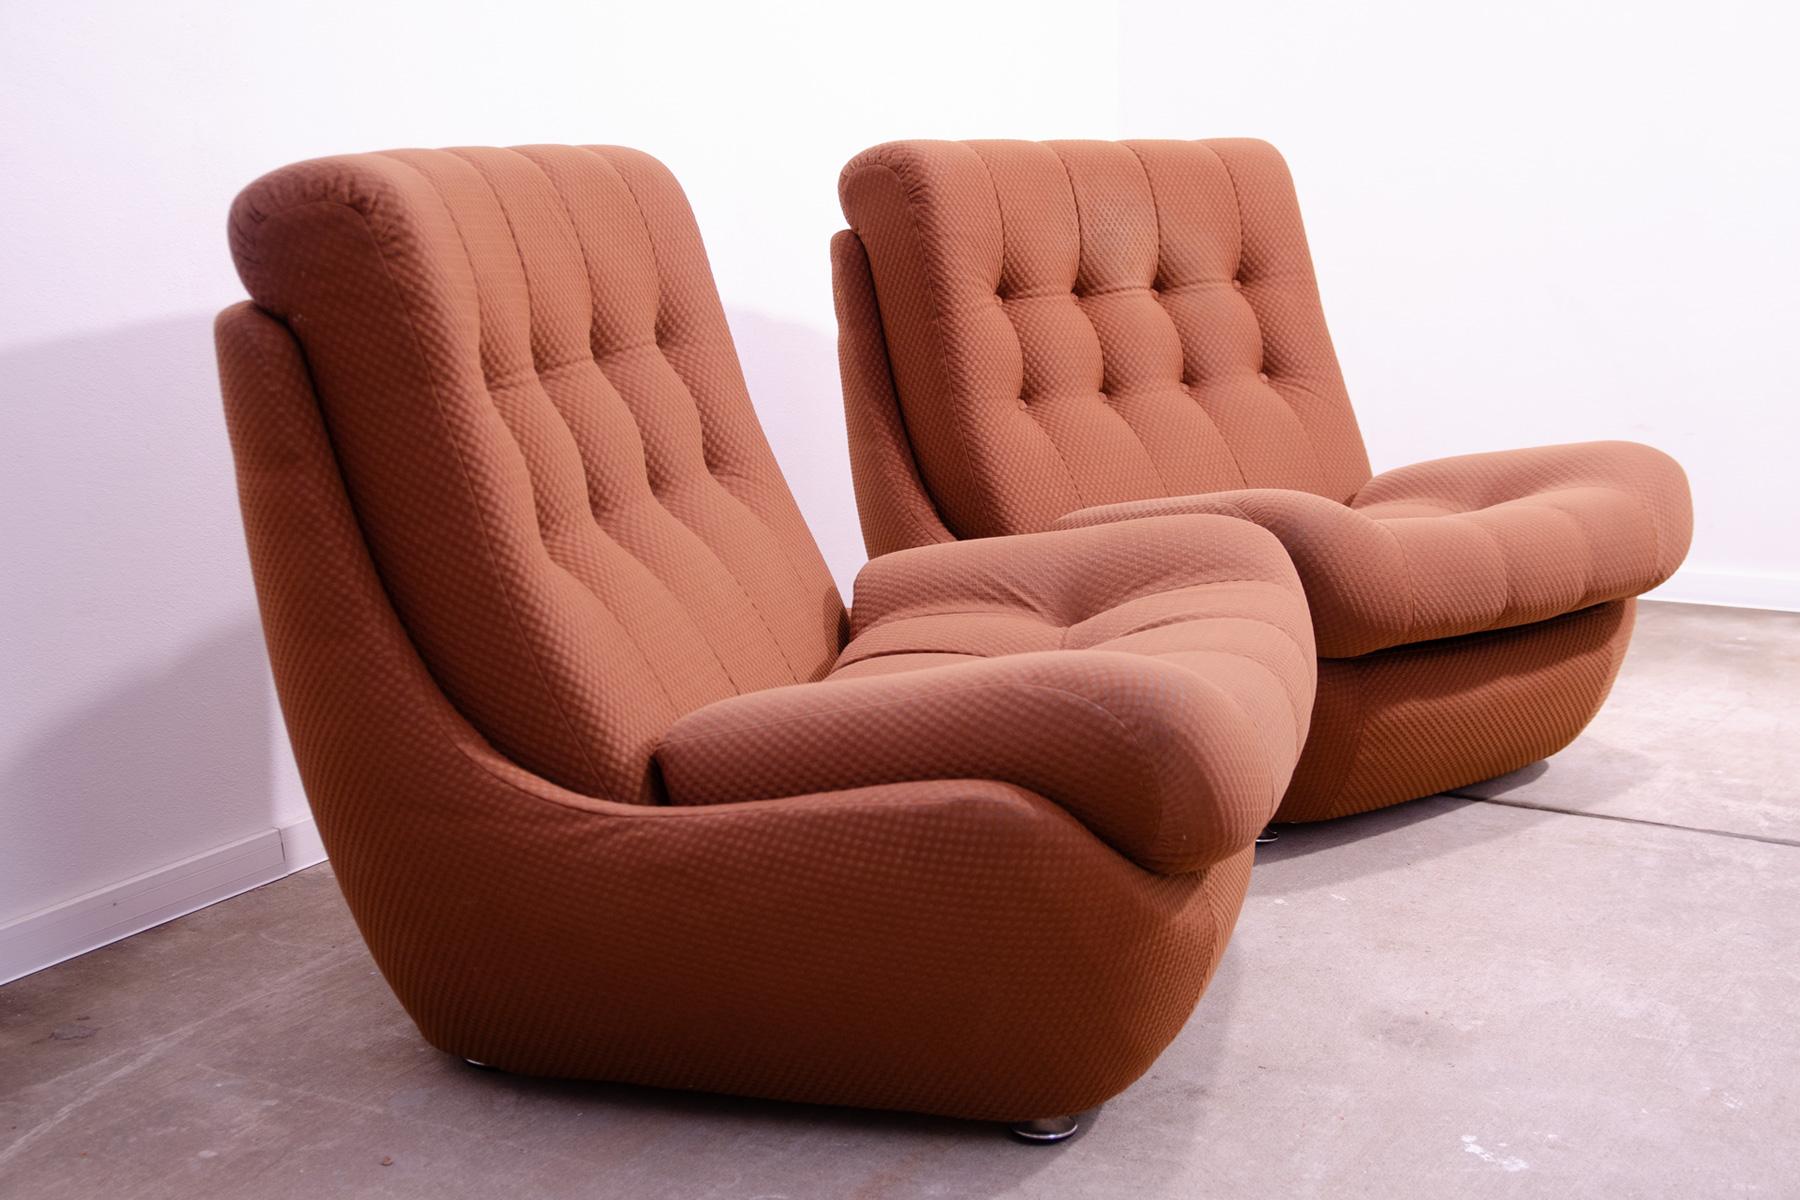 Eastern Bloc Vintage armchairs by Jitona, Czechoslovakia, 1970s In Good Condition For Sale In Prague 8, CZ